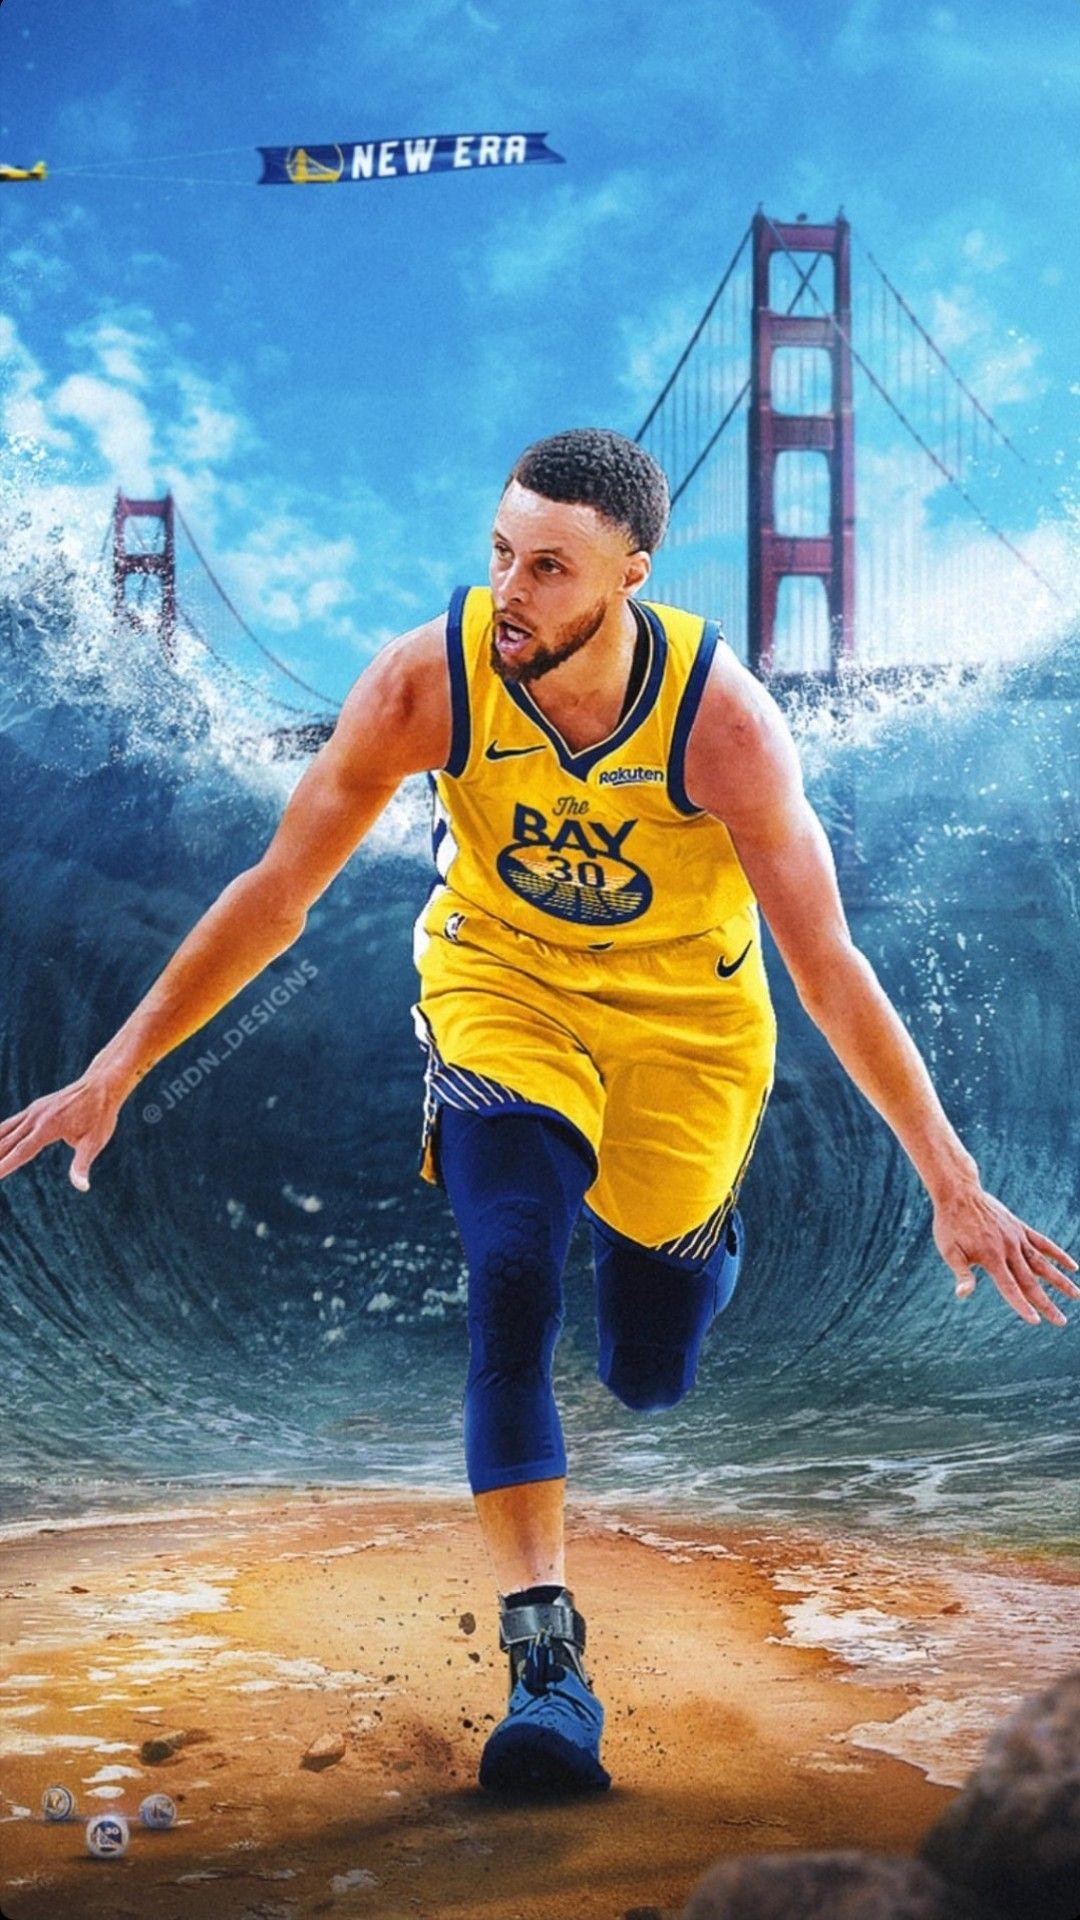 Stephen Curry wallpaper. BASKETBALL. Stephen curry